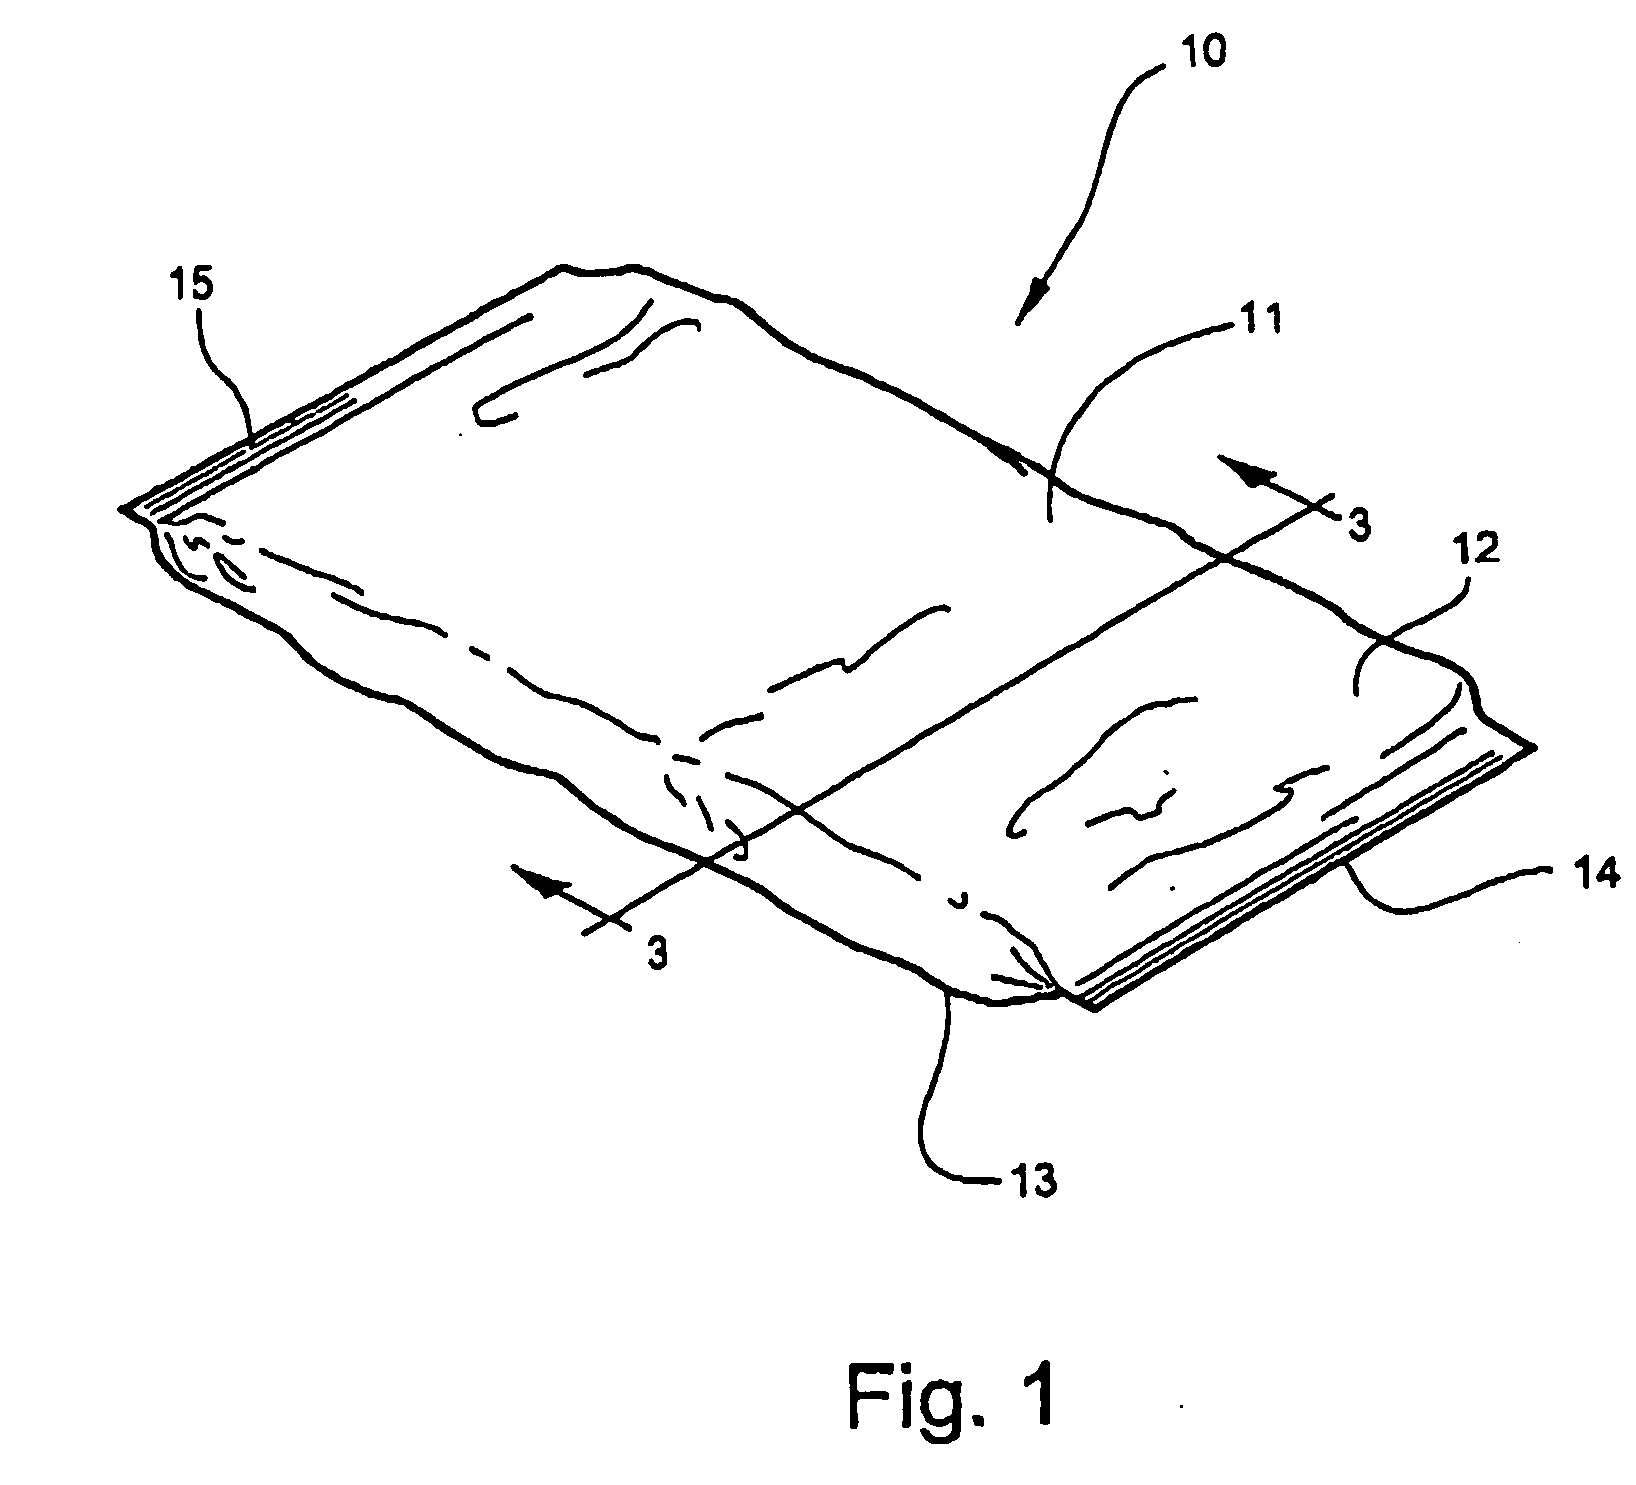 Knitted substrate for use in medical bandaging product bandaging product and method of forming the same